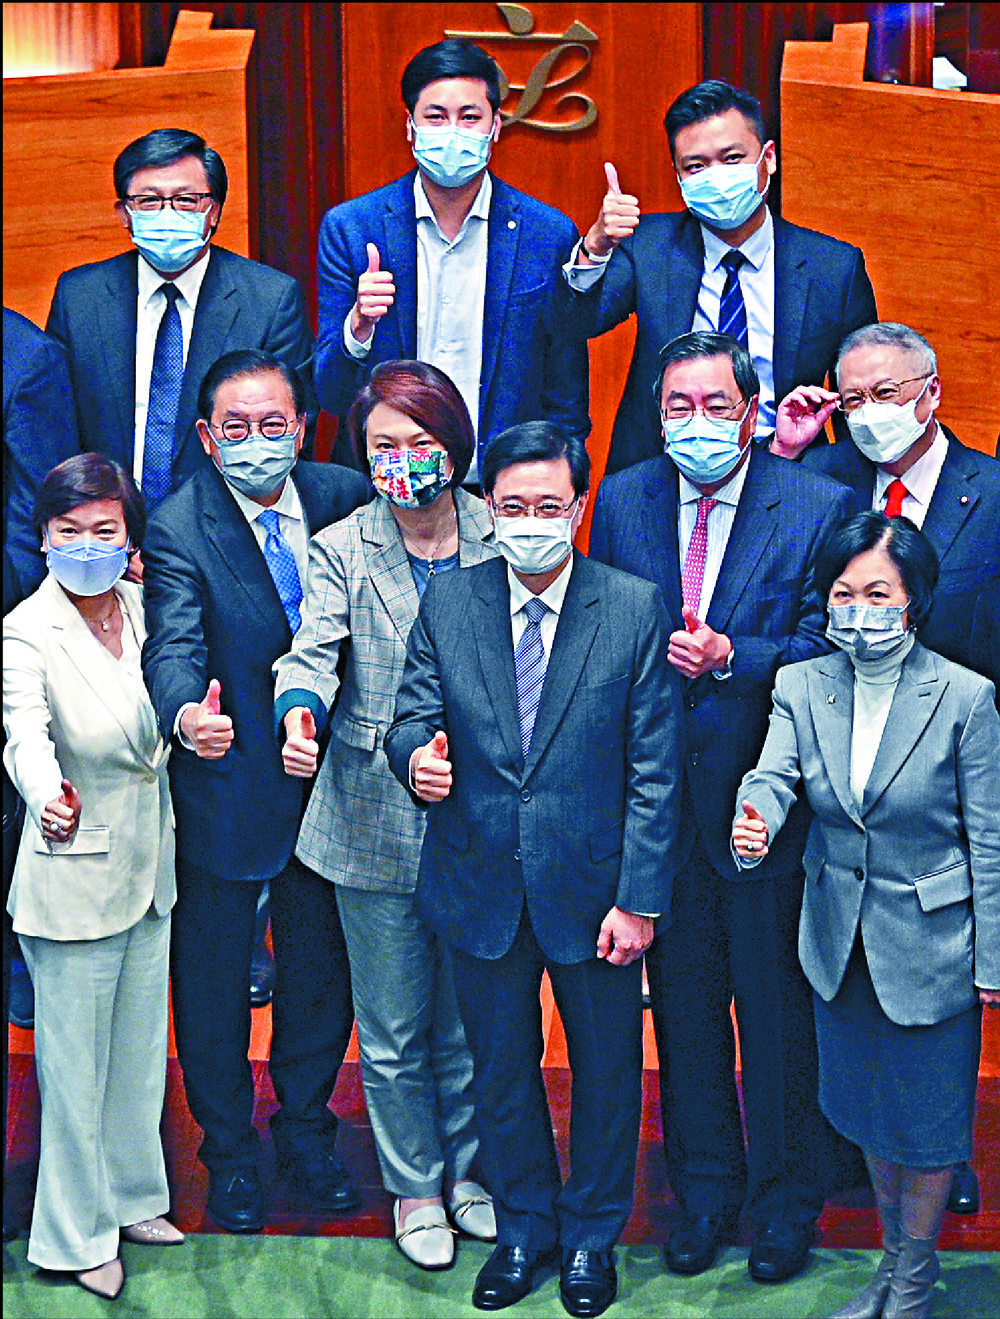 Lawmakers want share of blame and glory